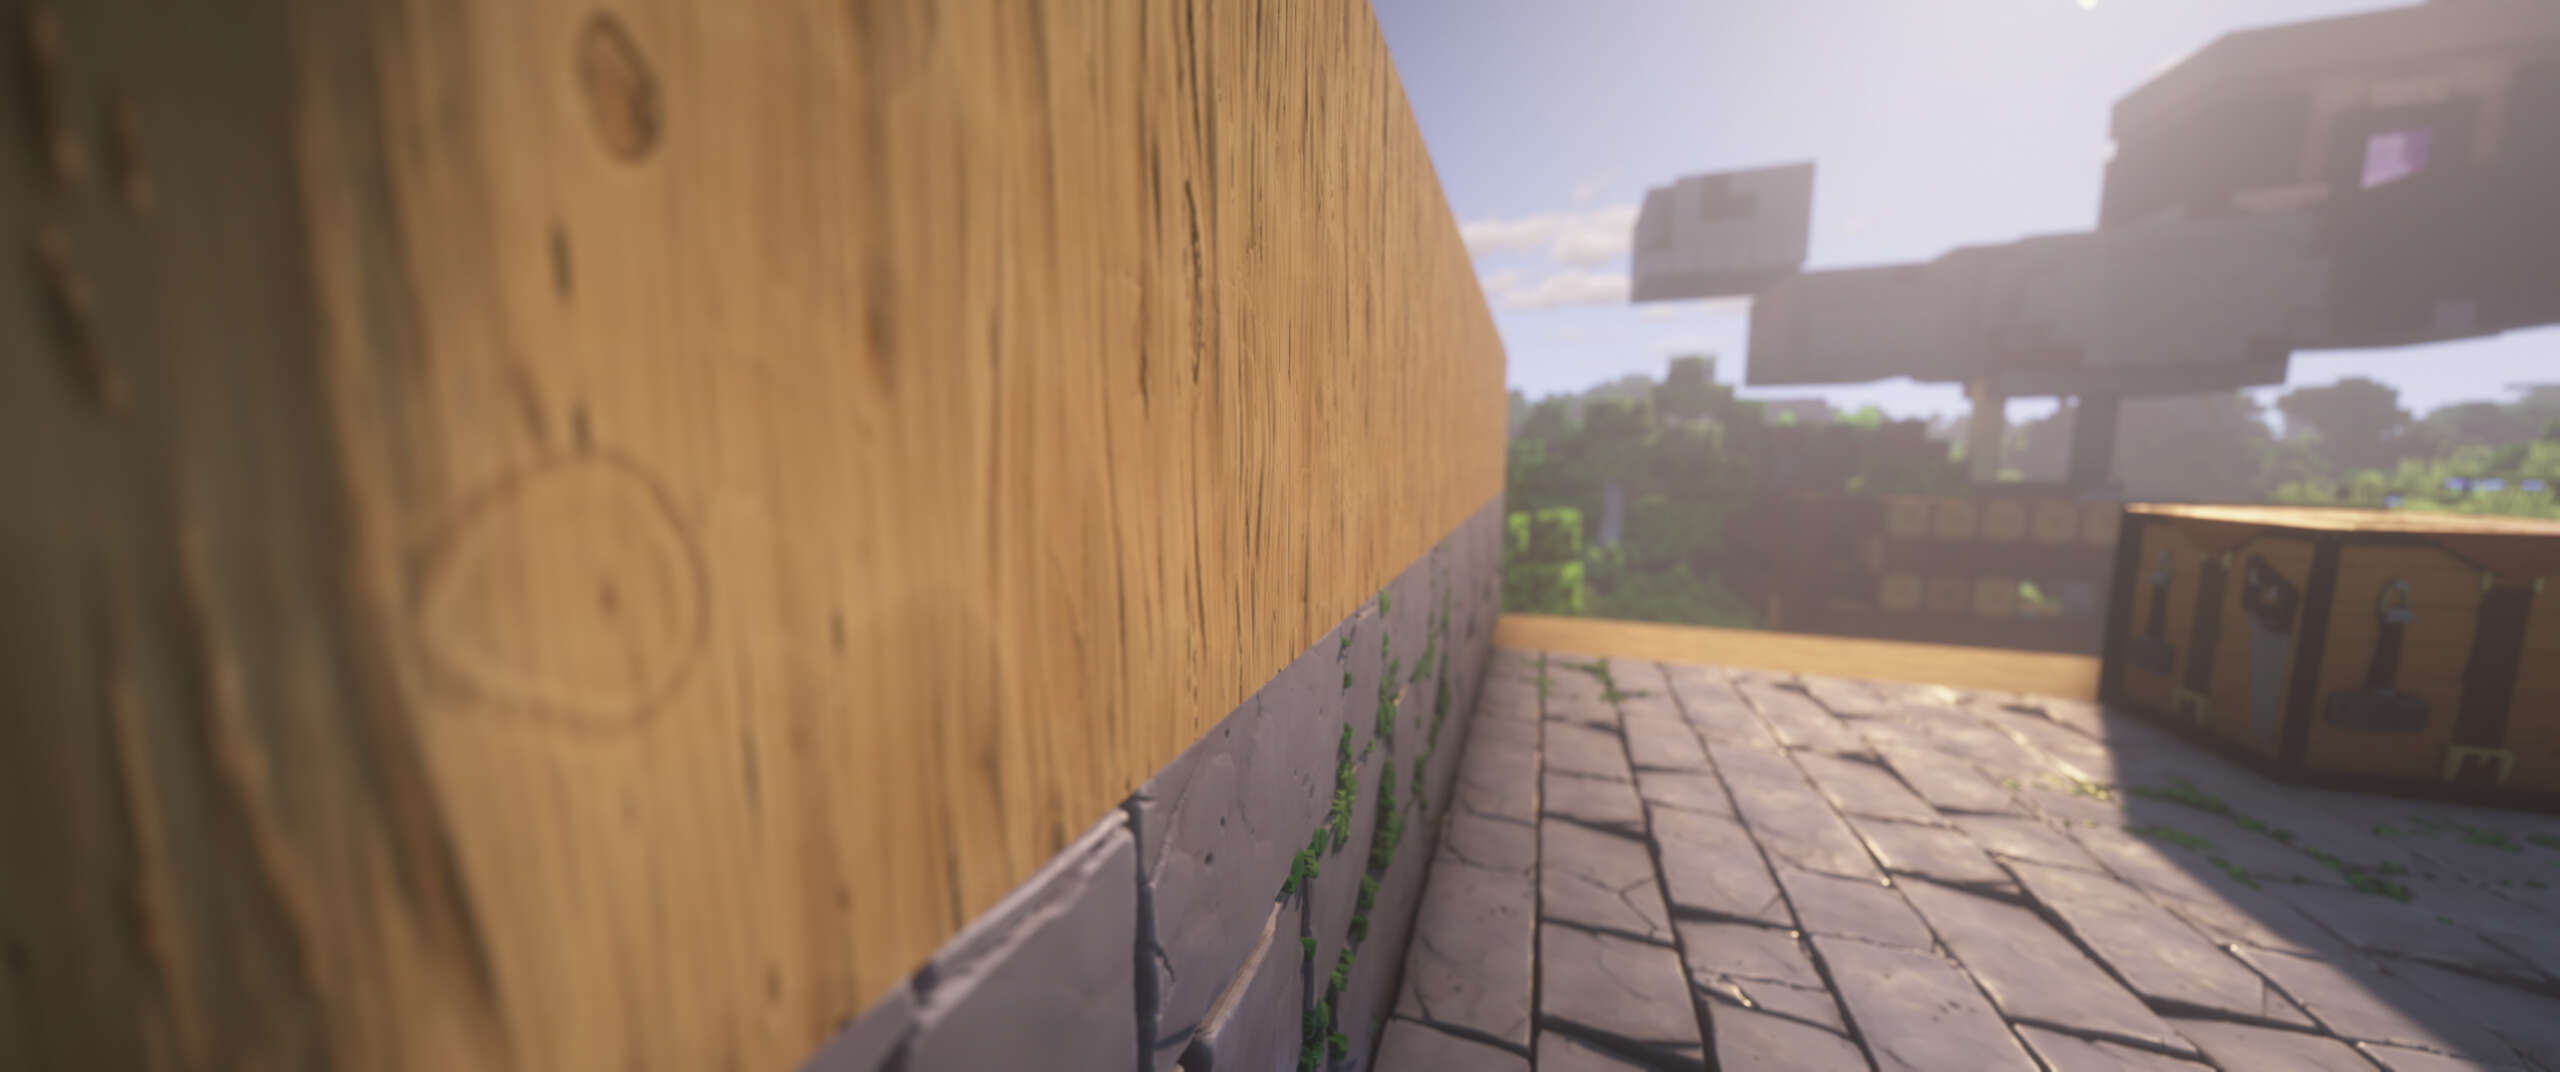 NAPP, Not Another Photorealistic Pack, May Just Be The Most Detailed Texture Pack Ever